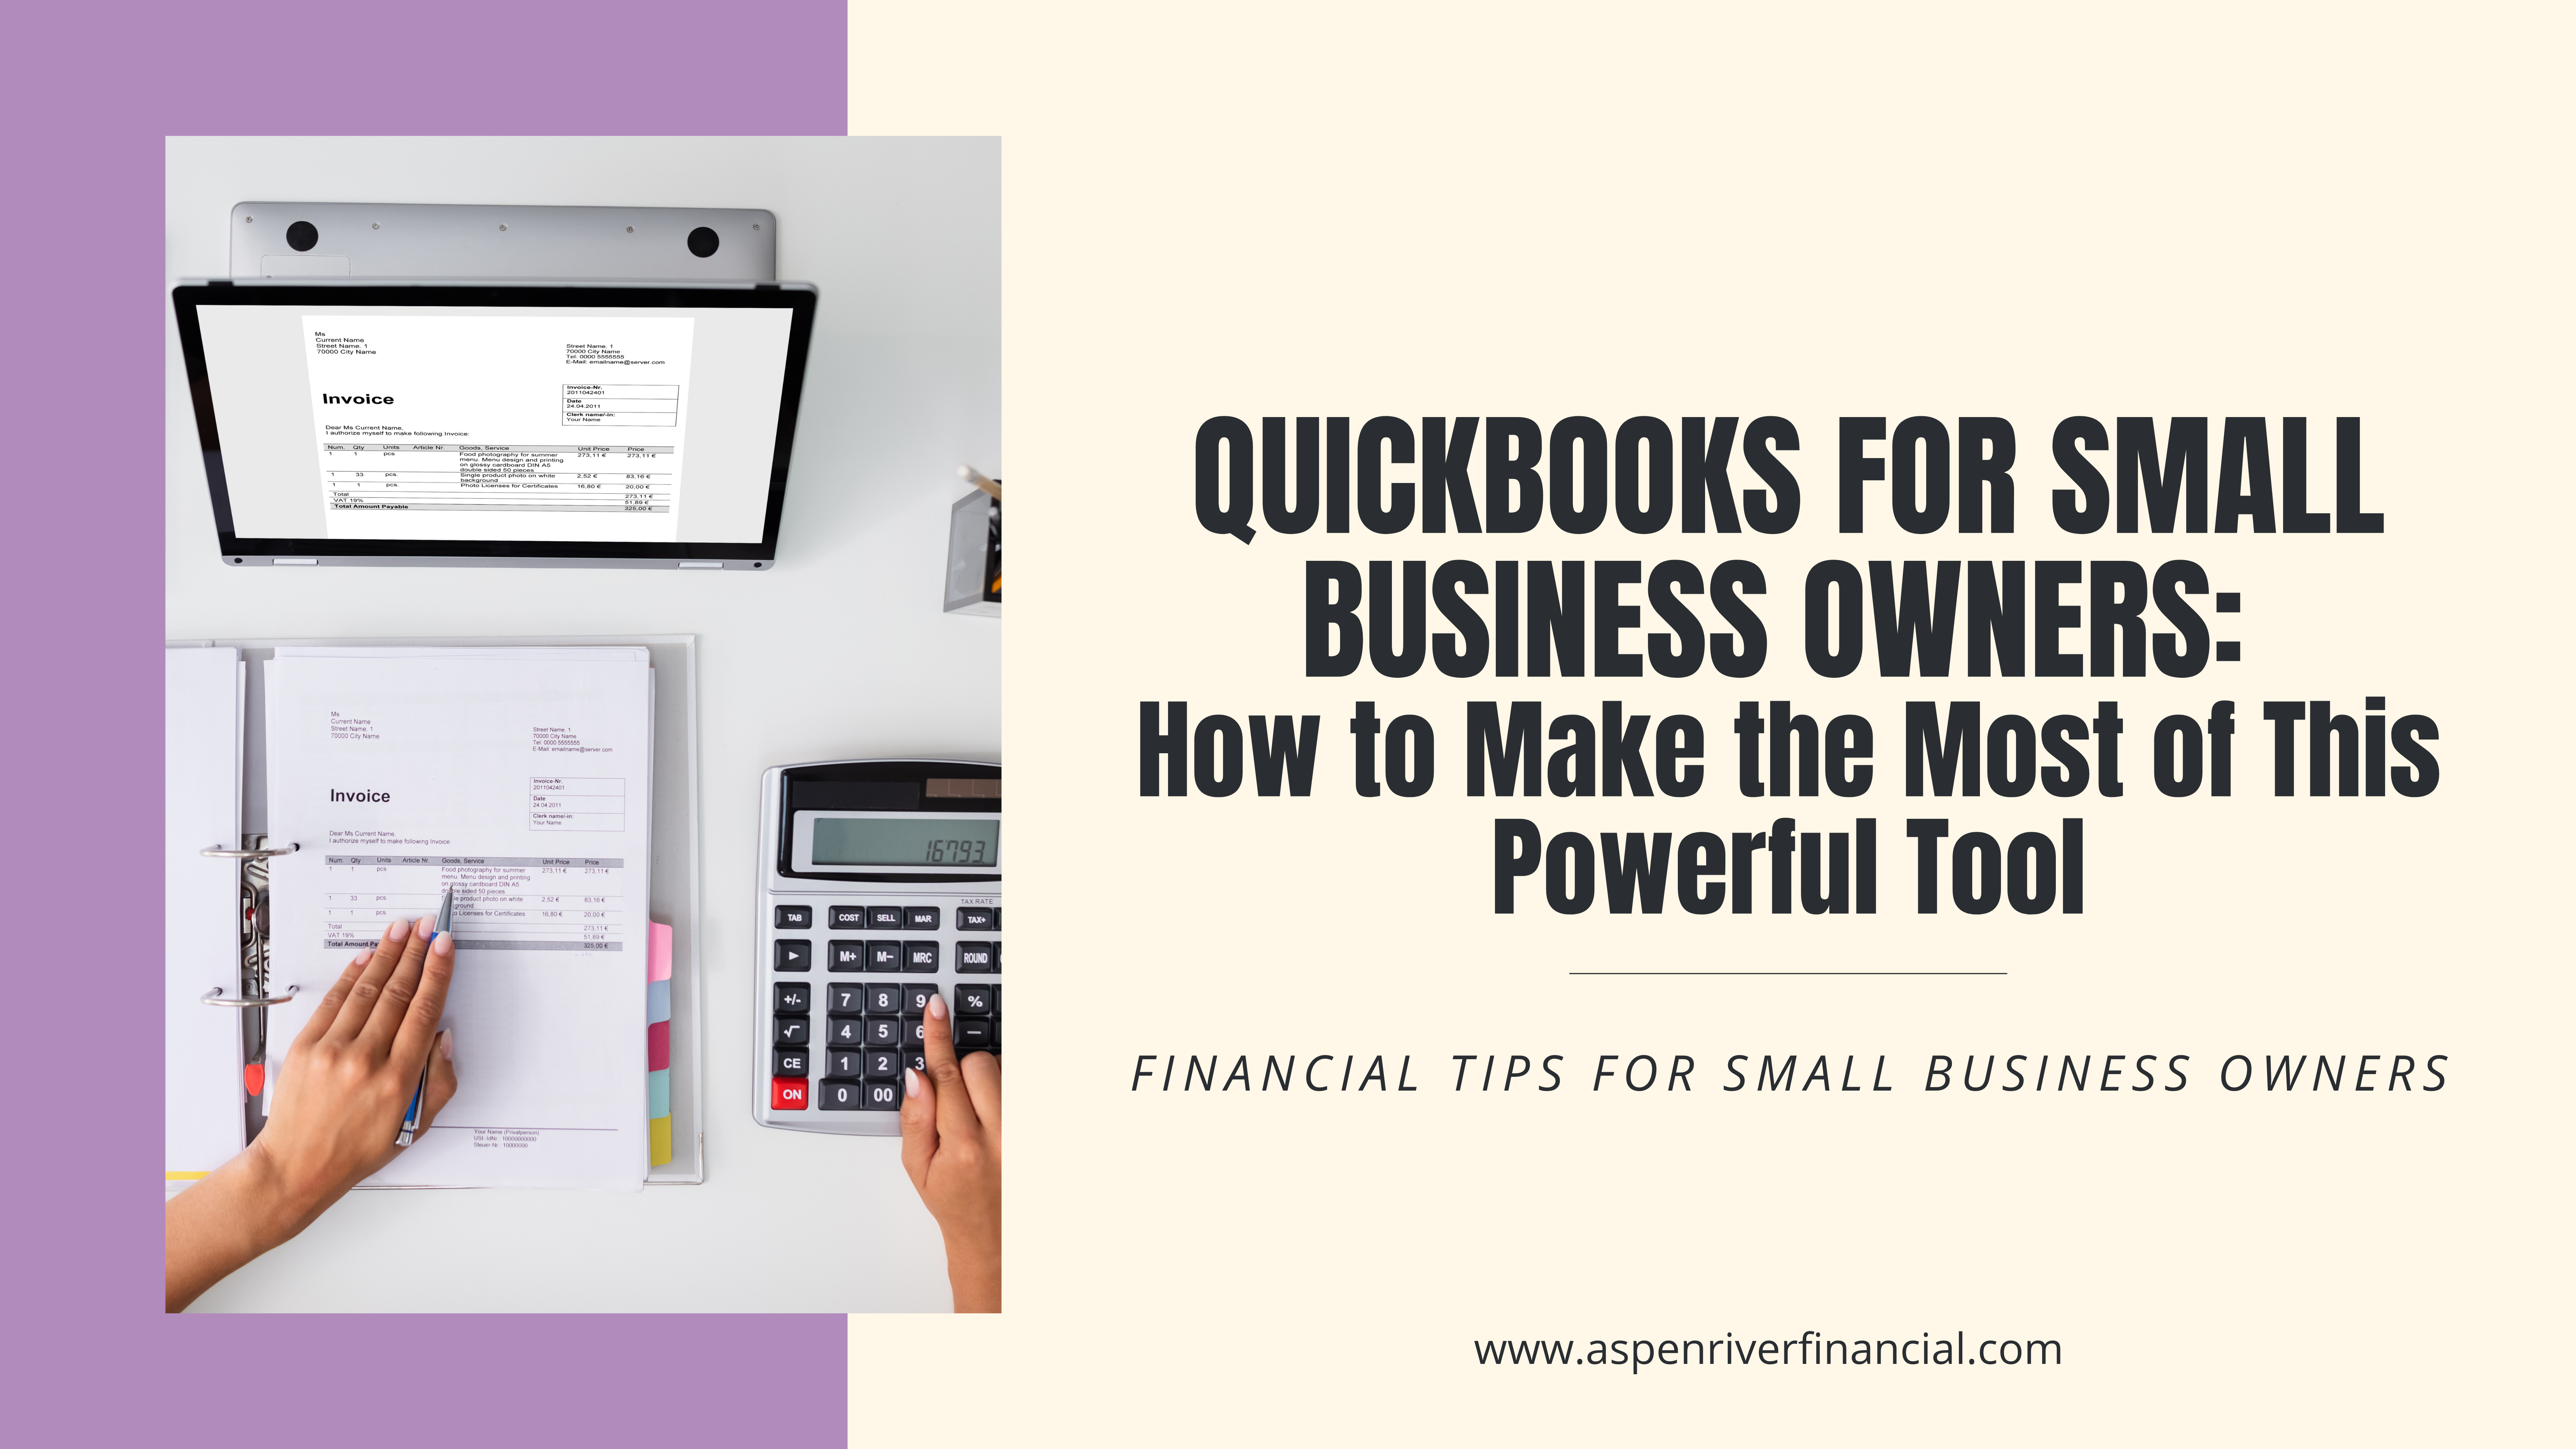 QuickBooks for Small Business Owners: How to Make the Most of This Powerful Tool